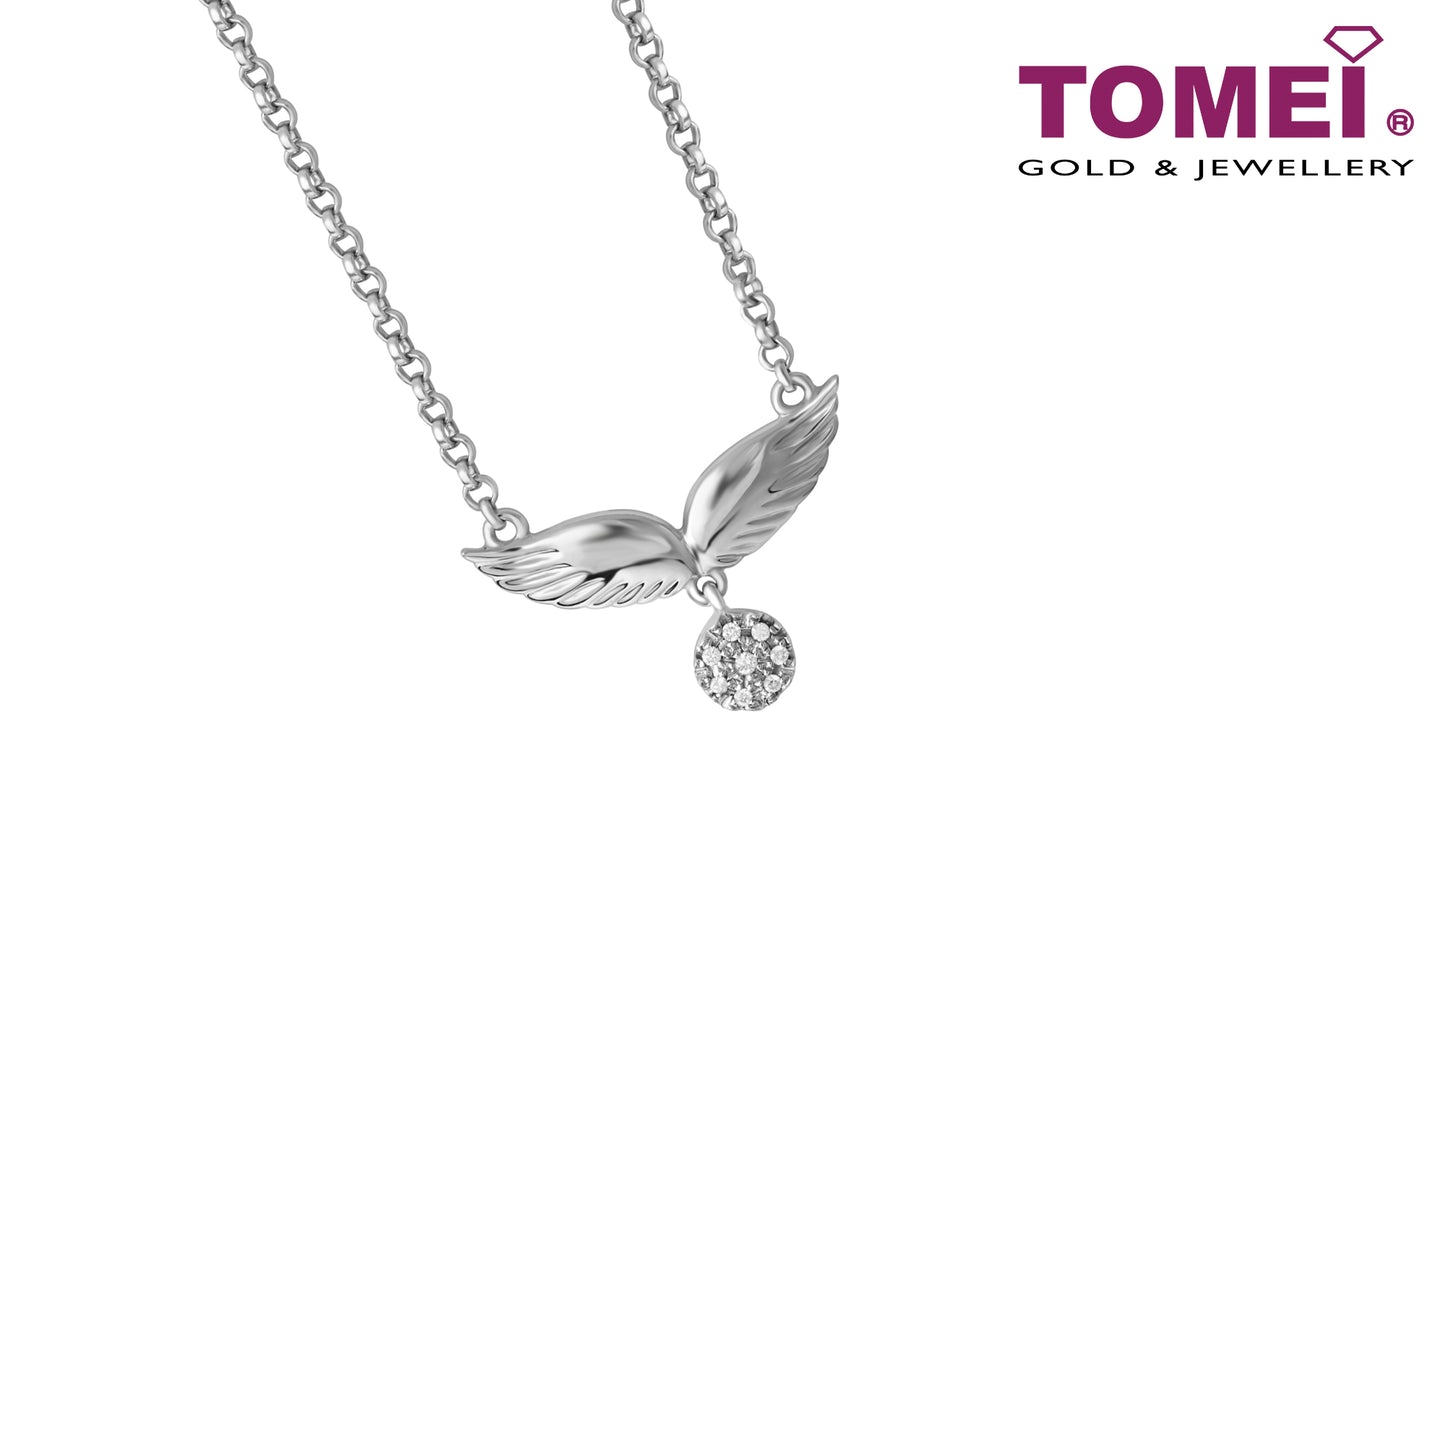 TOMEI Be My Wing Diamond Necklace, White Gold 375 (B0879)